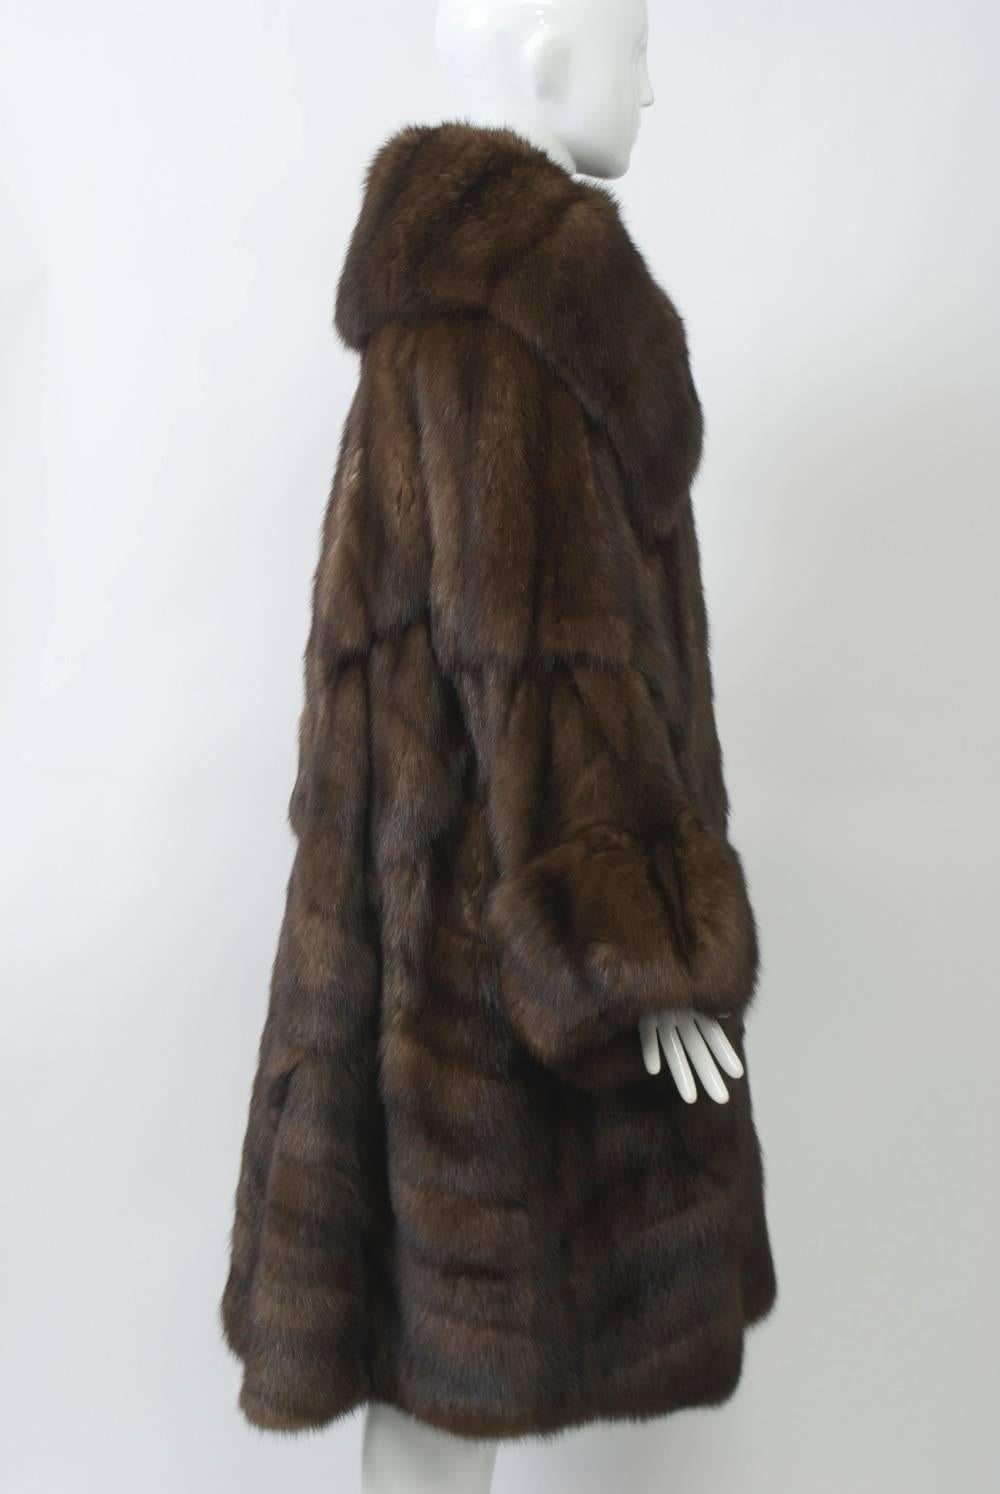 Fabulous and lush sable coat by Fendi featuring a very deep spread collar and wide sleeves with turned-back cuffs. Diagonally oriented skins allow for a wide sweep and an abundance of sable. Two large buttons fasten in front. Lined in cocoa silk